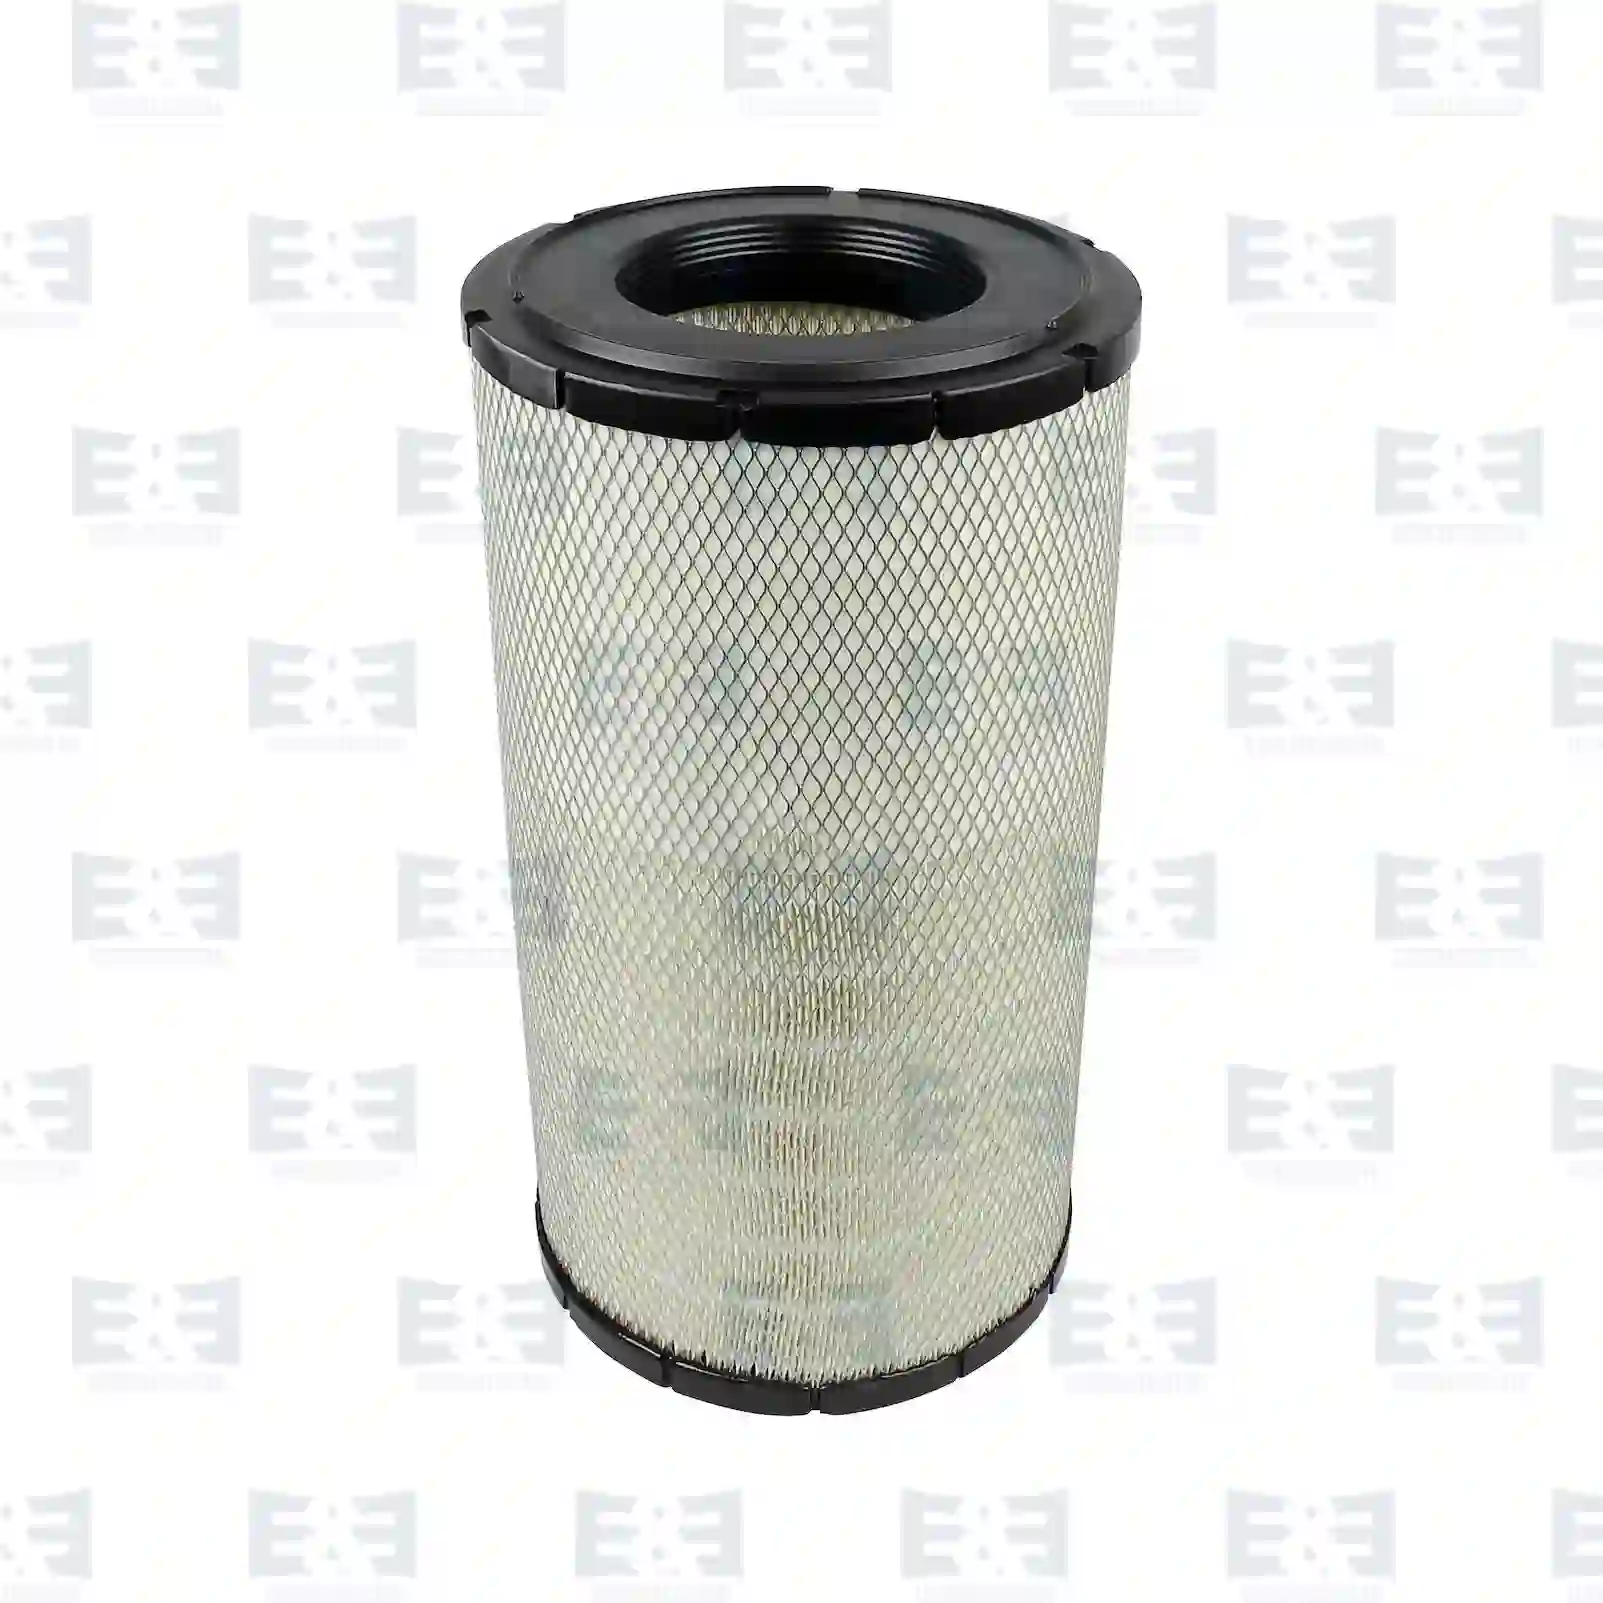  Air Filter Air filter, EE No 2E2204944 ,  oem no:52RS000351, 52RS001778, 275809A1, 87682984, KSH0933, 142-1339, 7700056504, 263G237051, 3098170830, 4459543, 4459549, 5559549, AT175223, L4459549, 32/925335, AT223226, F434394, 7281109560, 7414298, 81083040099, 3903030M1, 0254386, 0040943804, 73181672, 7420838436, 7700056504, 0114102051, 0203104000, 0203104030, 11110022 E&E Truck Spare Parts | Truck Spare Parts, Auotomotive Spare Parts